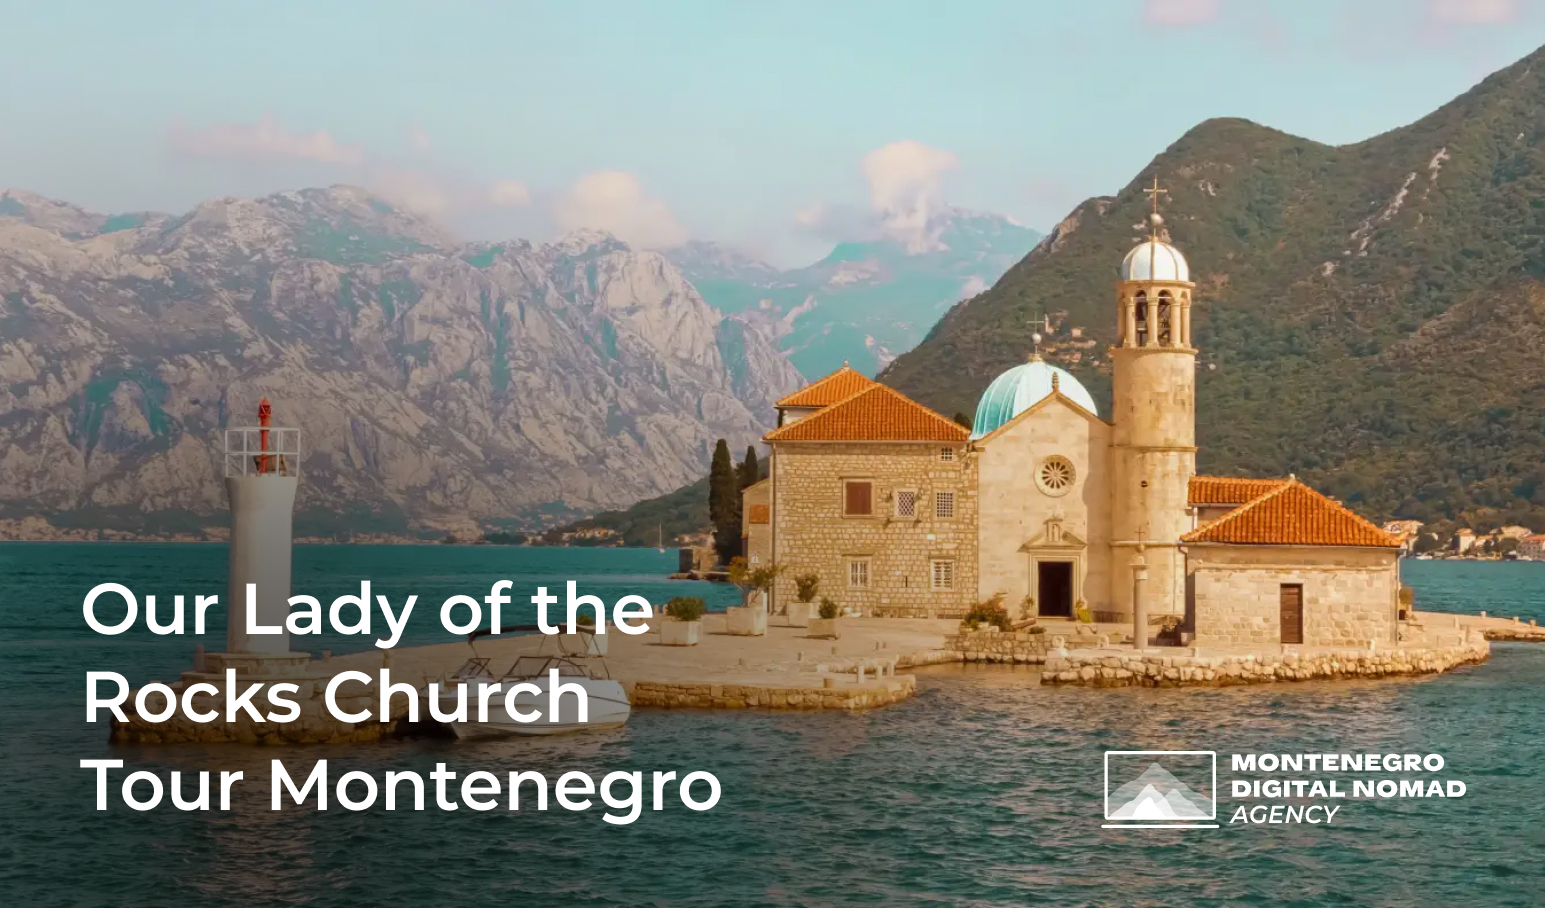 Image of Our Lady of the Rocks island church in Montenegro with text overlay - Our Lady of the Rocks Island Tour